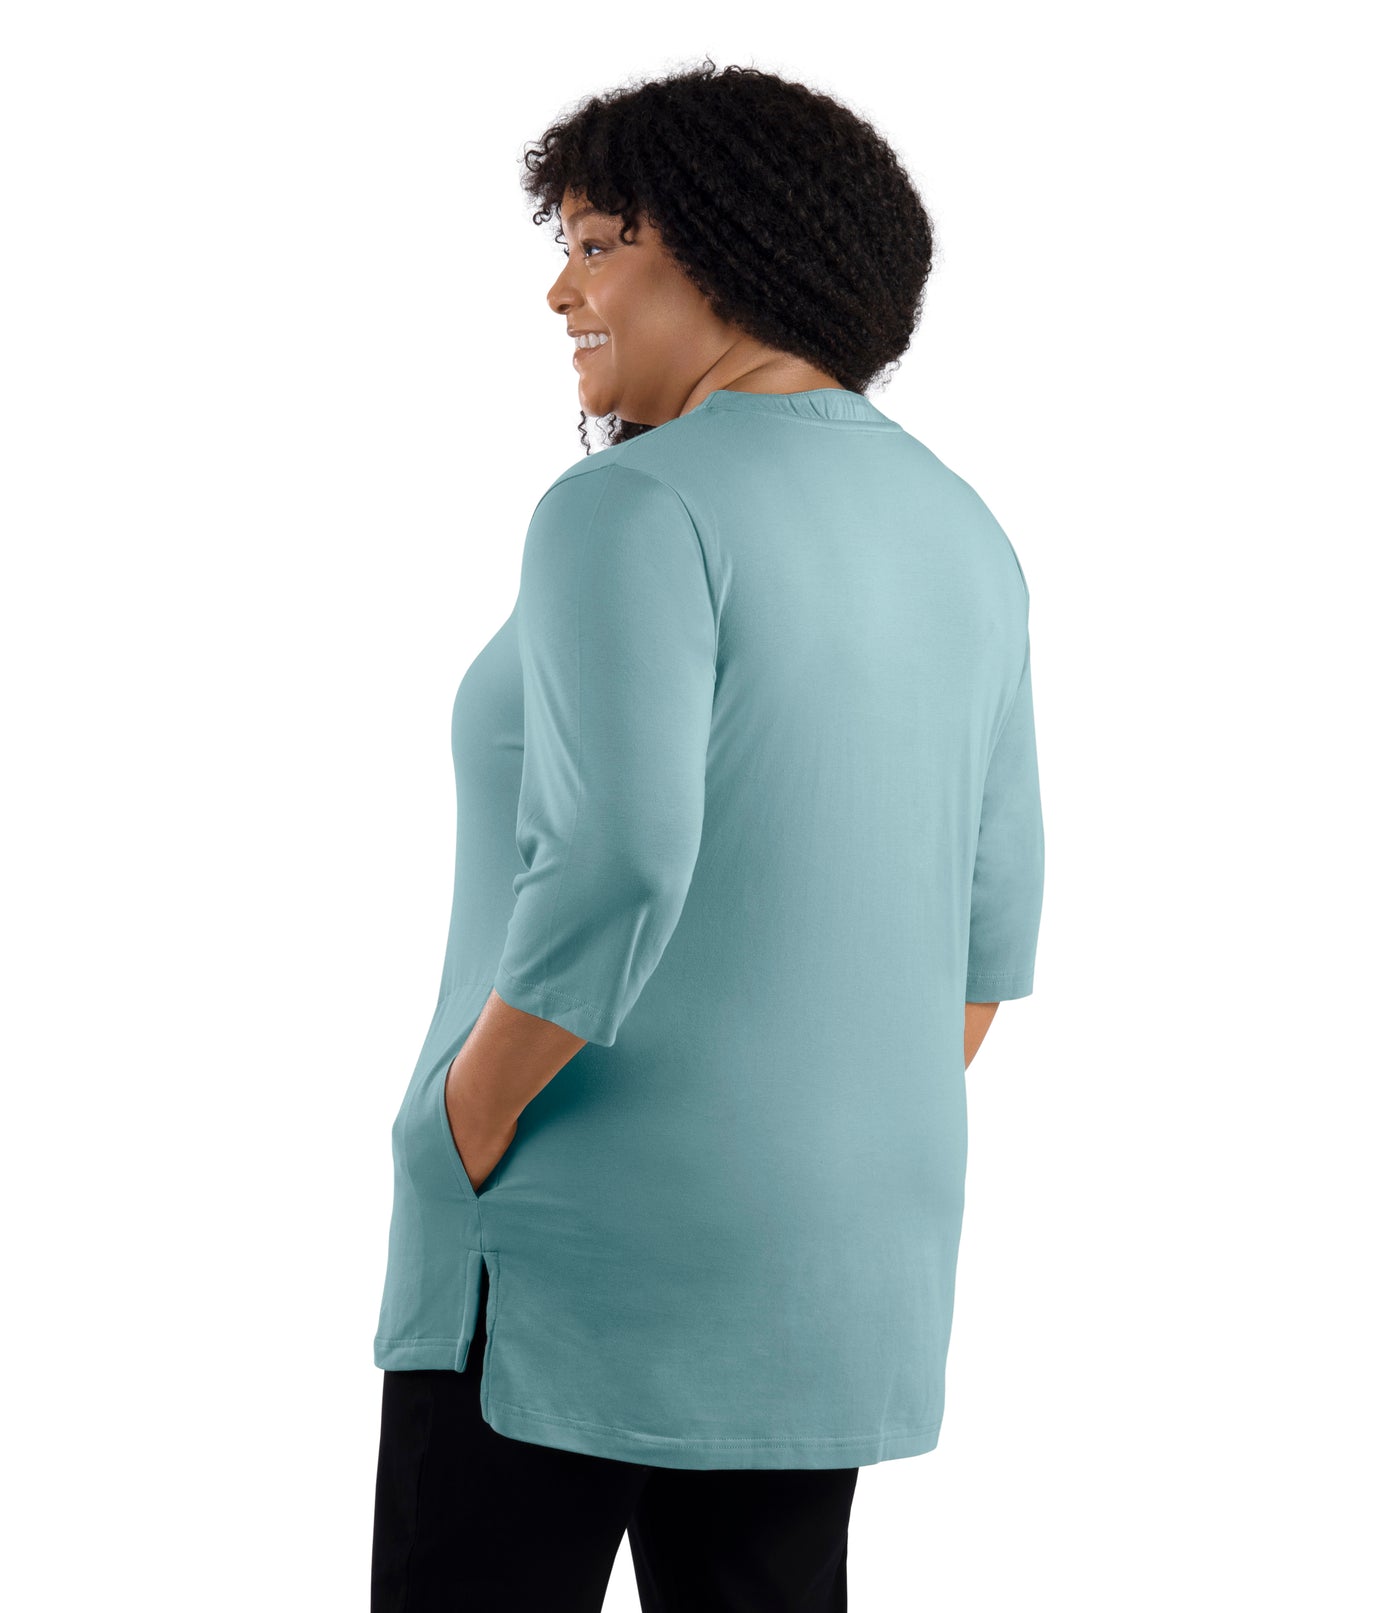 JunoActive Model wearing Stretch Naturals Lite 3/4 Sleeve Button Henley, facing back, one hand in pocket of shirt and other by her side. Color calm jade.